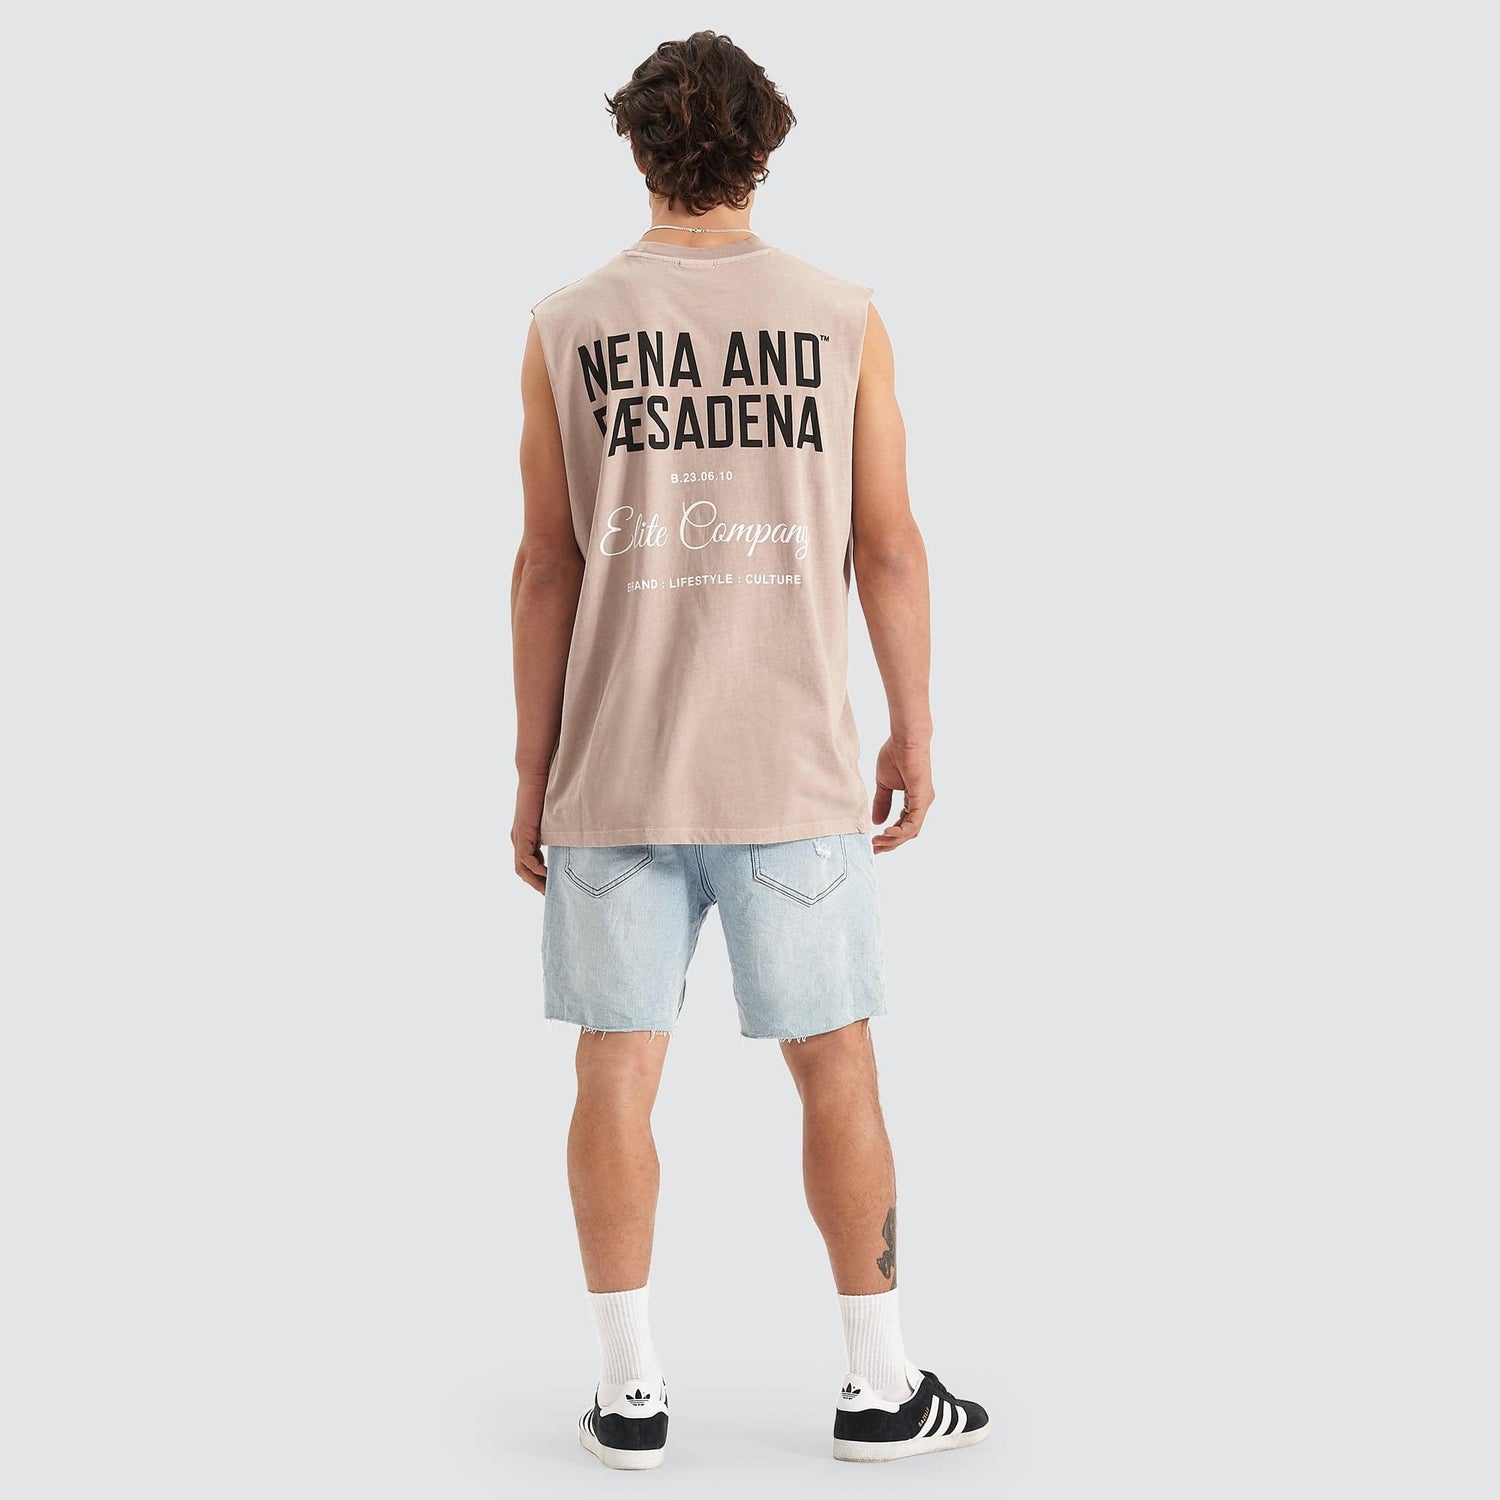 Hesitation Relaxed Muscle Tee Pigment Grey